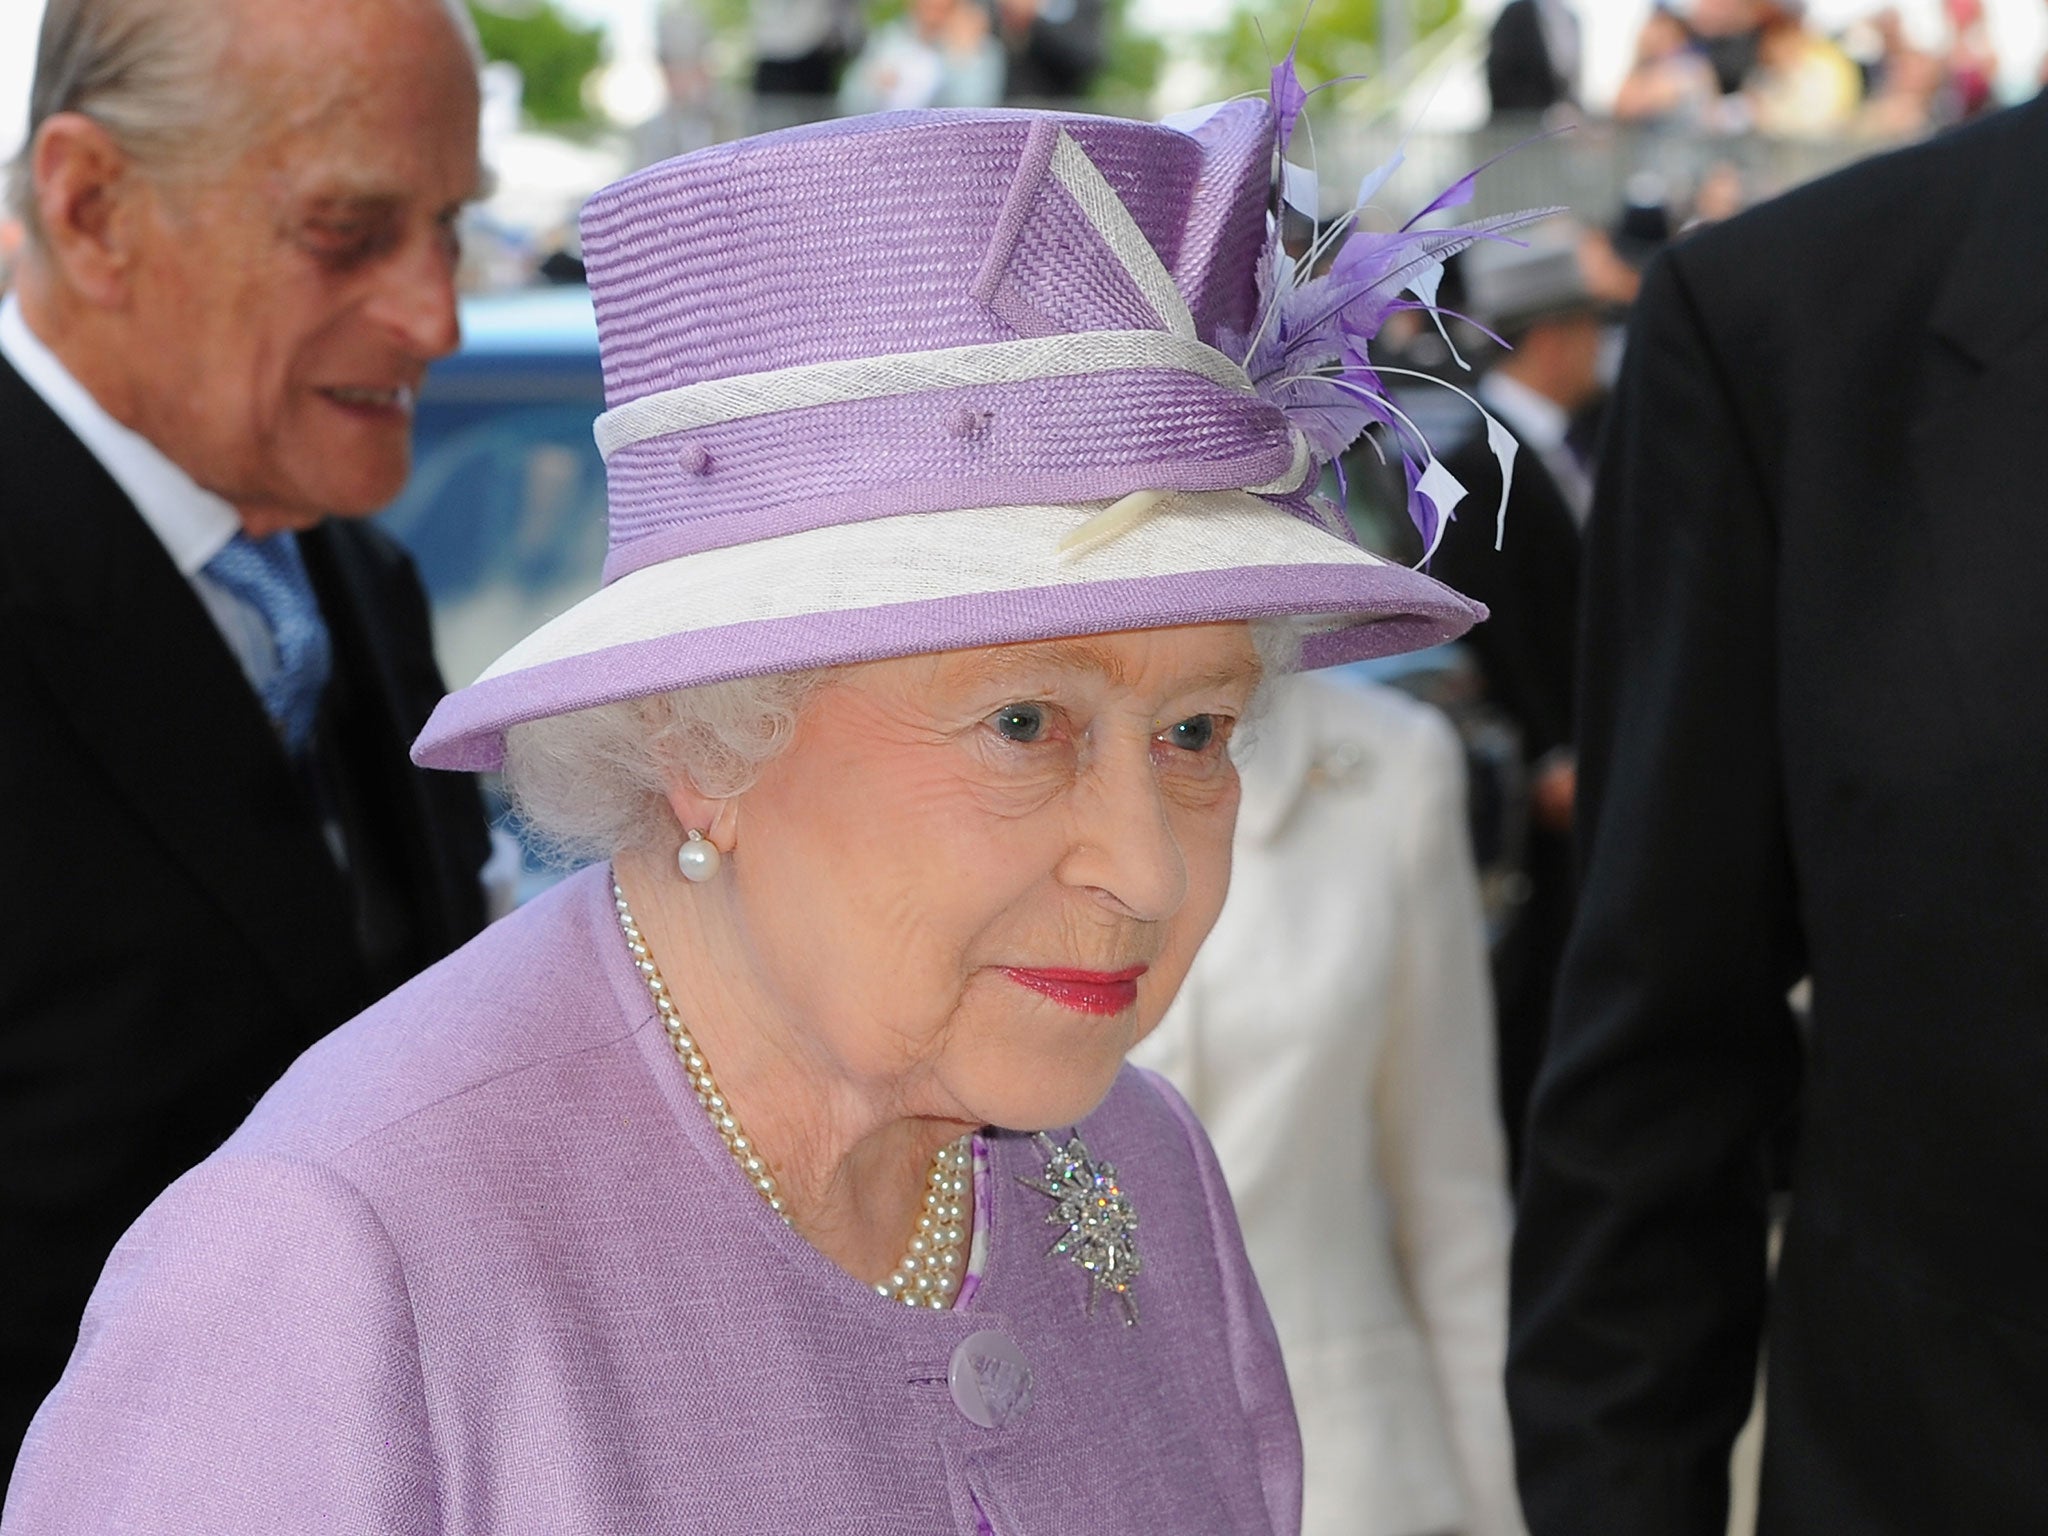 Queen Elizabeth II attends Derby day at the Investec Derby Festival at Epsom Racecourse on June 7, 2014 in Epsom, England.